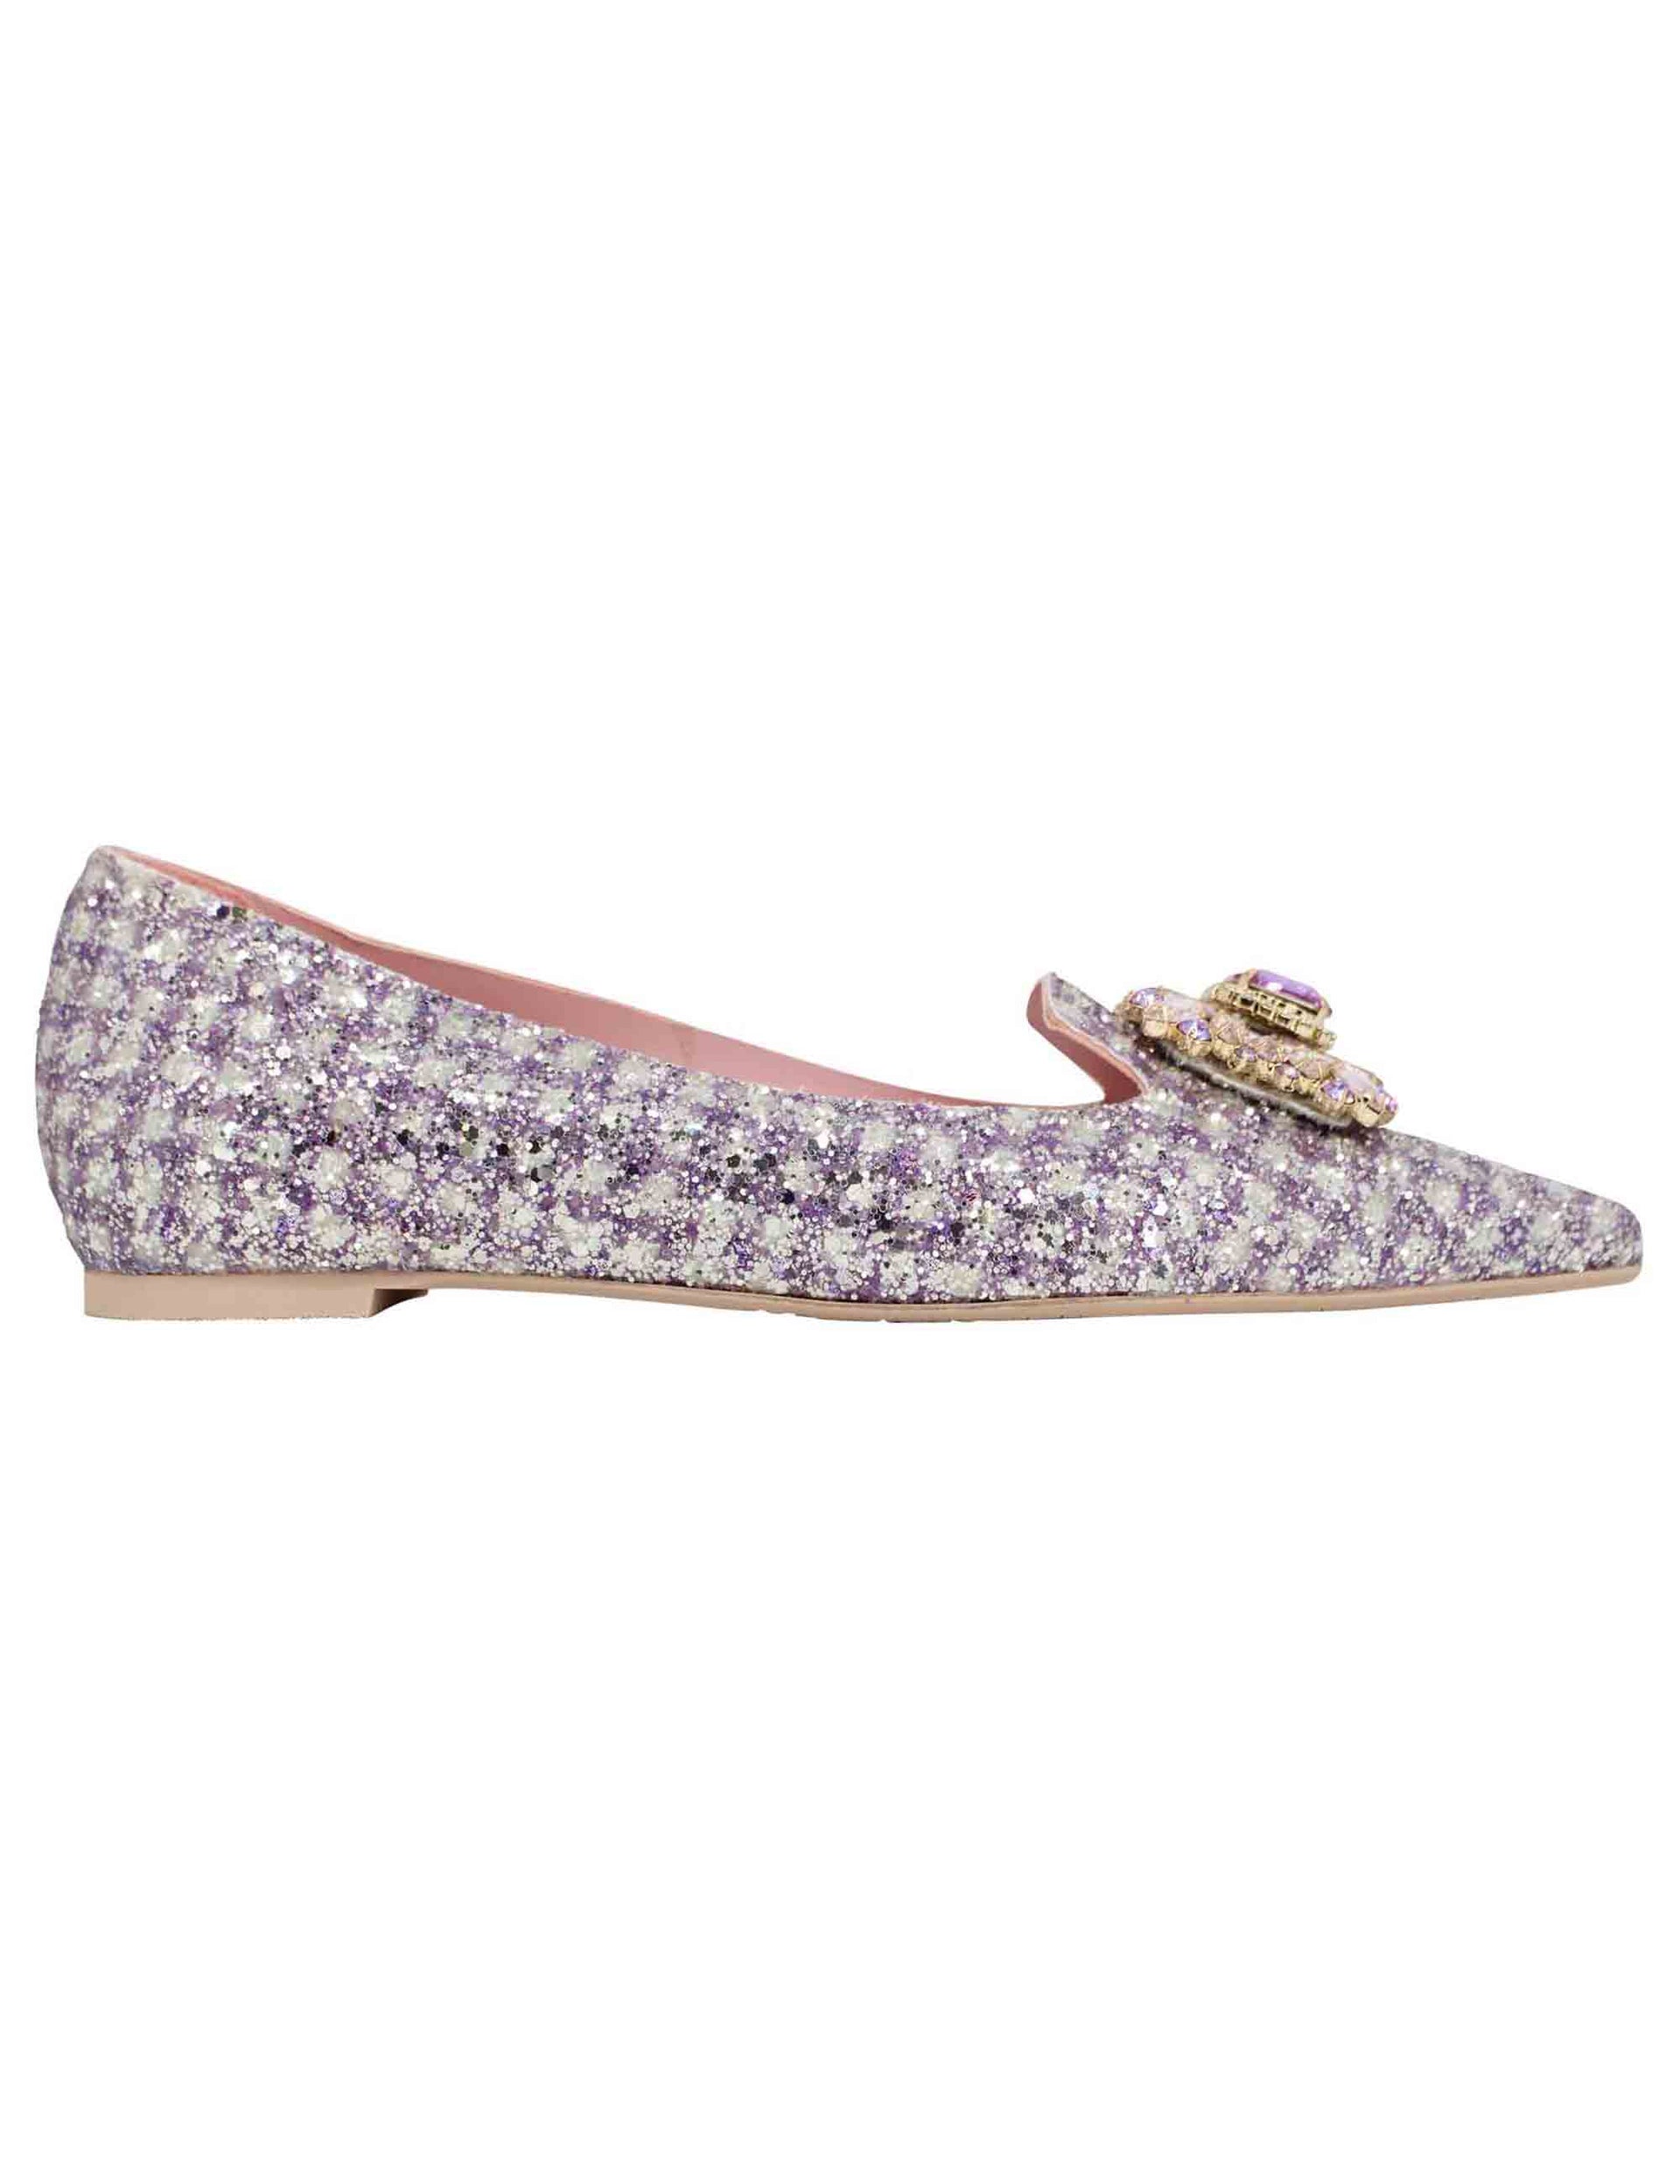 Women's ballet flats in lilac fabric with jewel and pointed toe